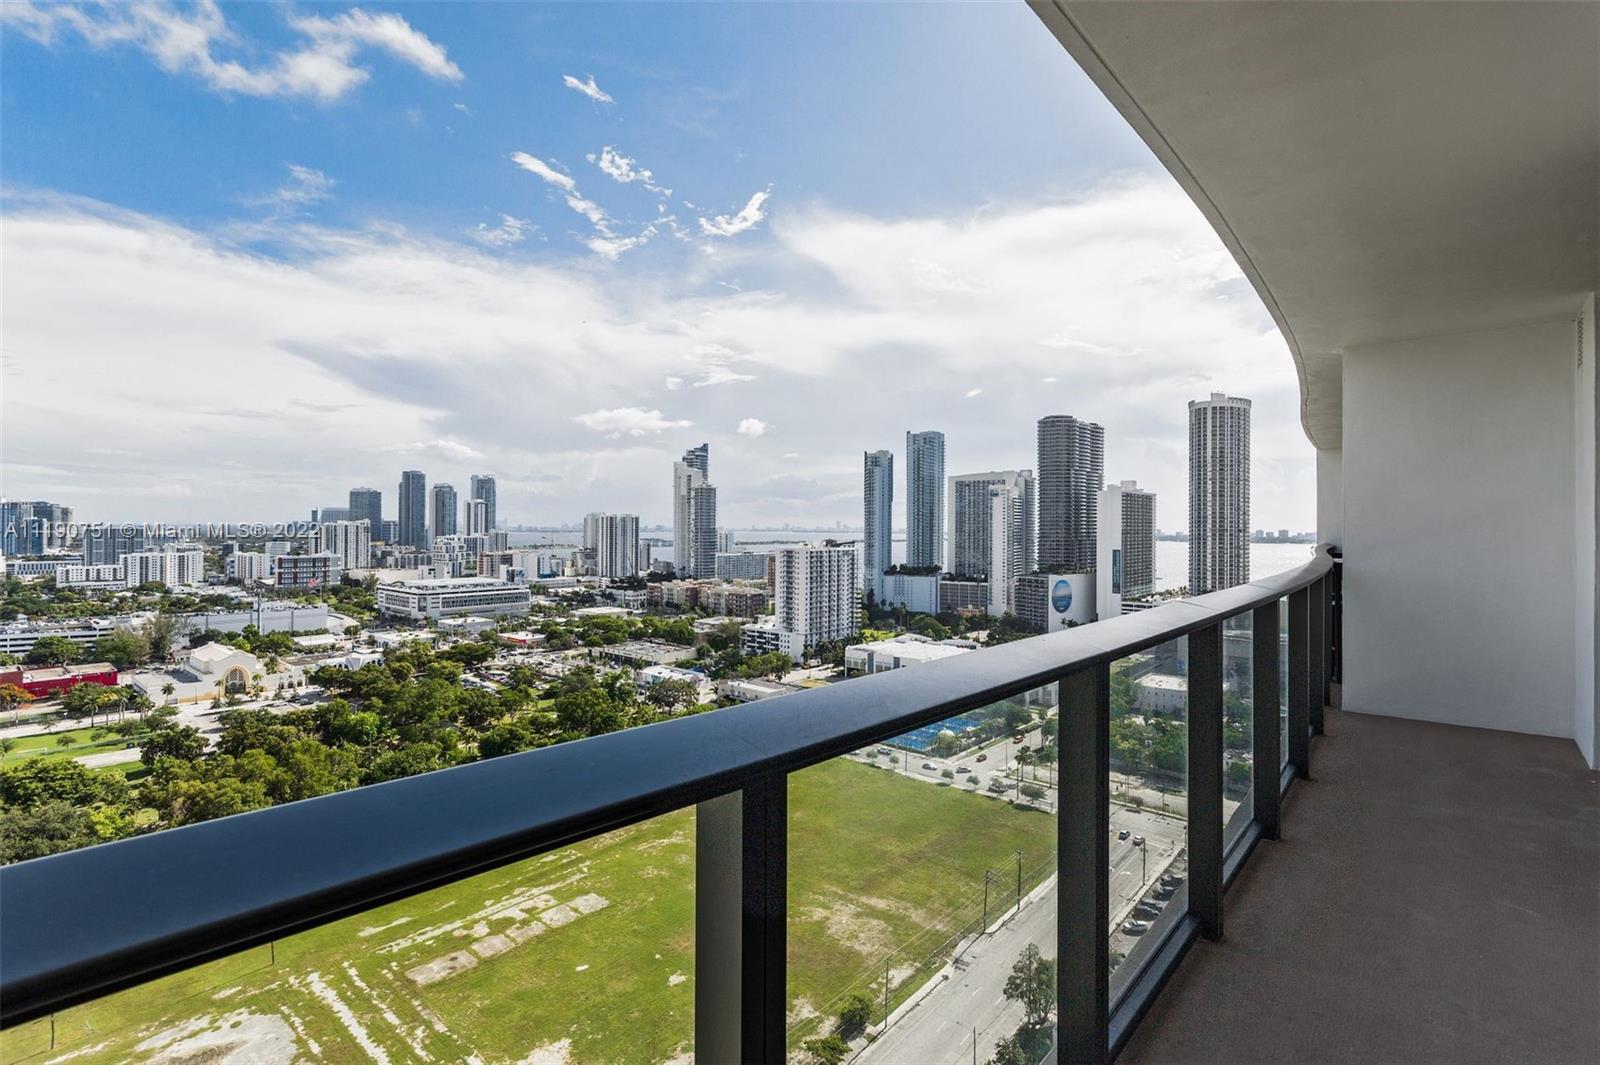 Spacious 1 bedroom 1 bathroom in between downtown and the design district. Breathtaking views overlo